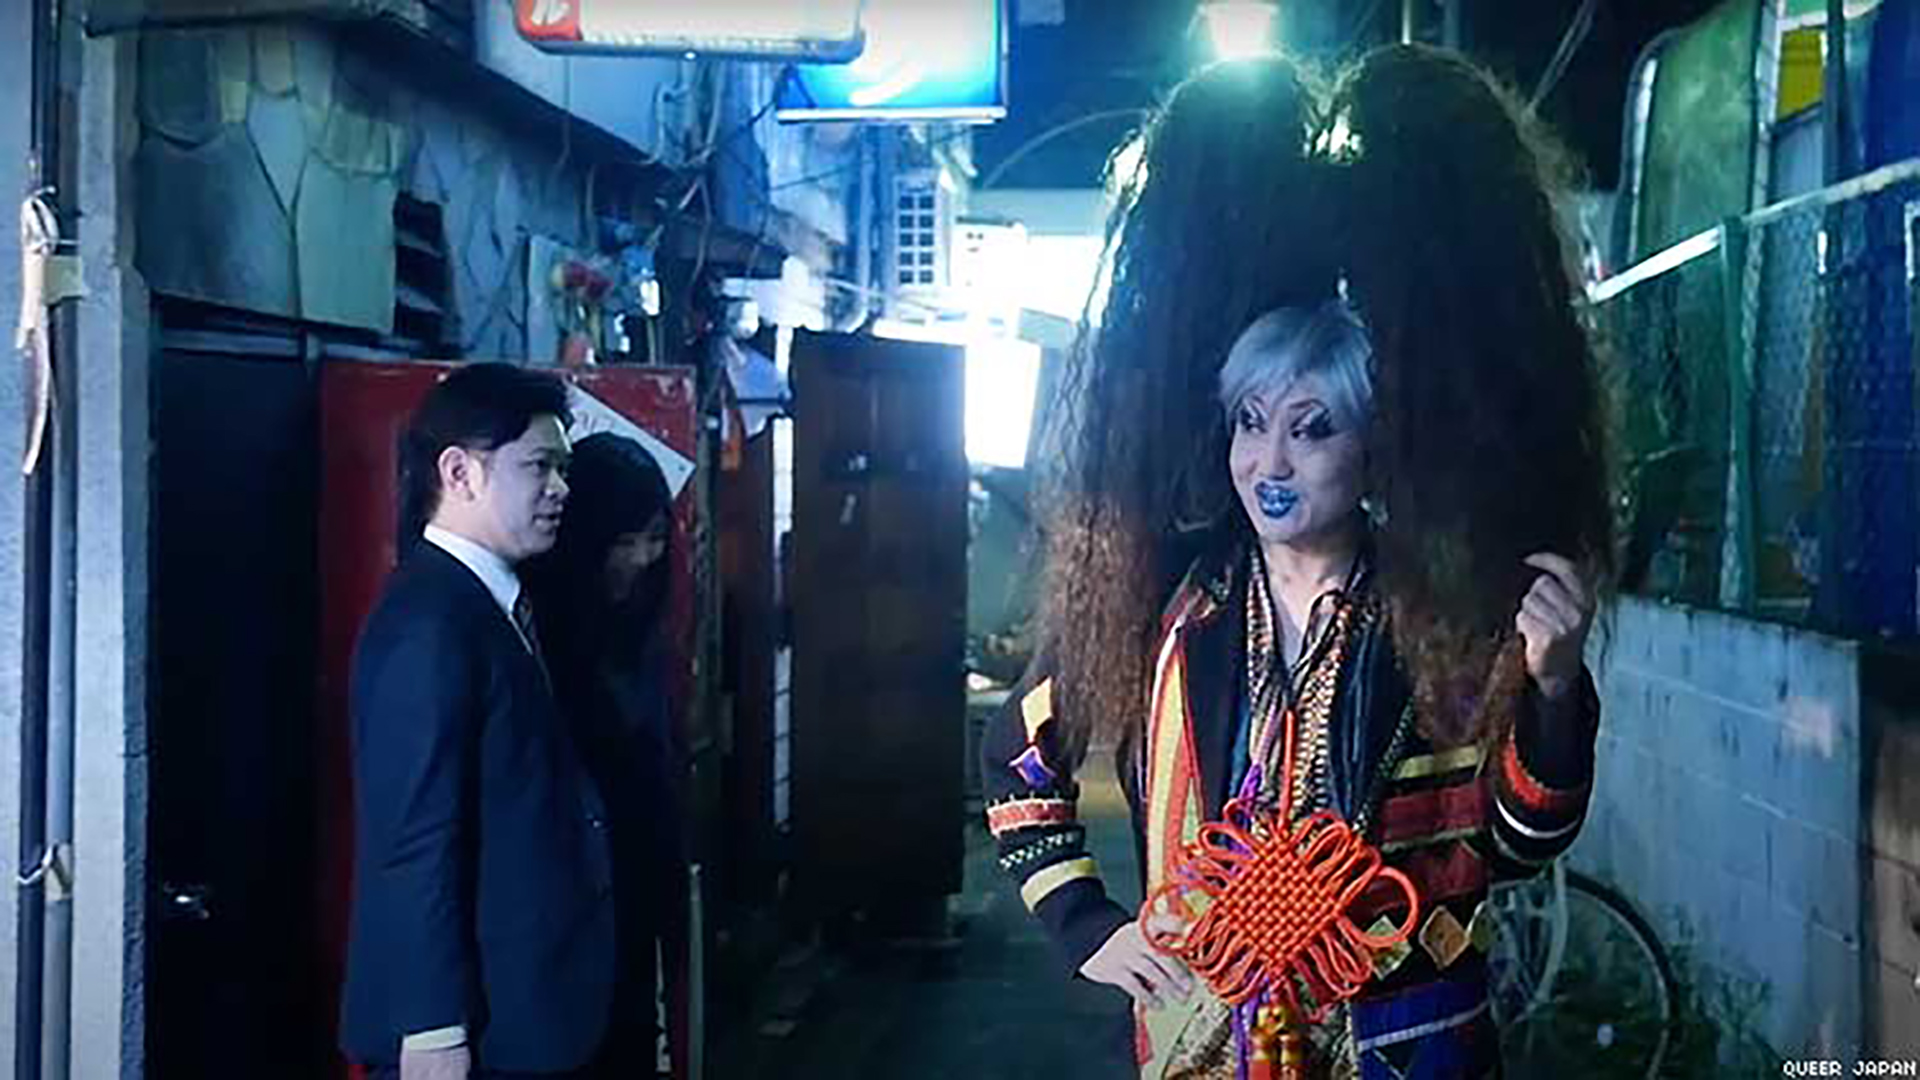 A Japanese drag artist in a huge wig smiles at a businessman in a back alley.